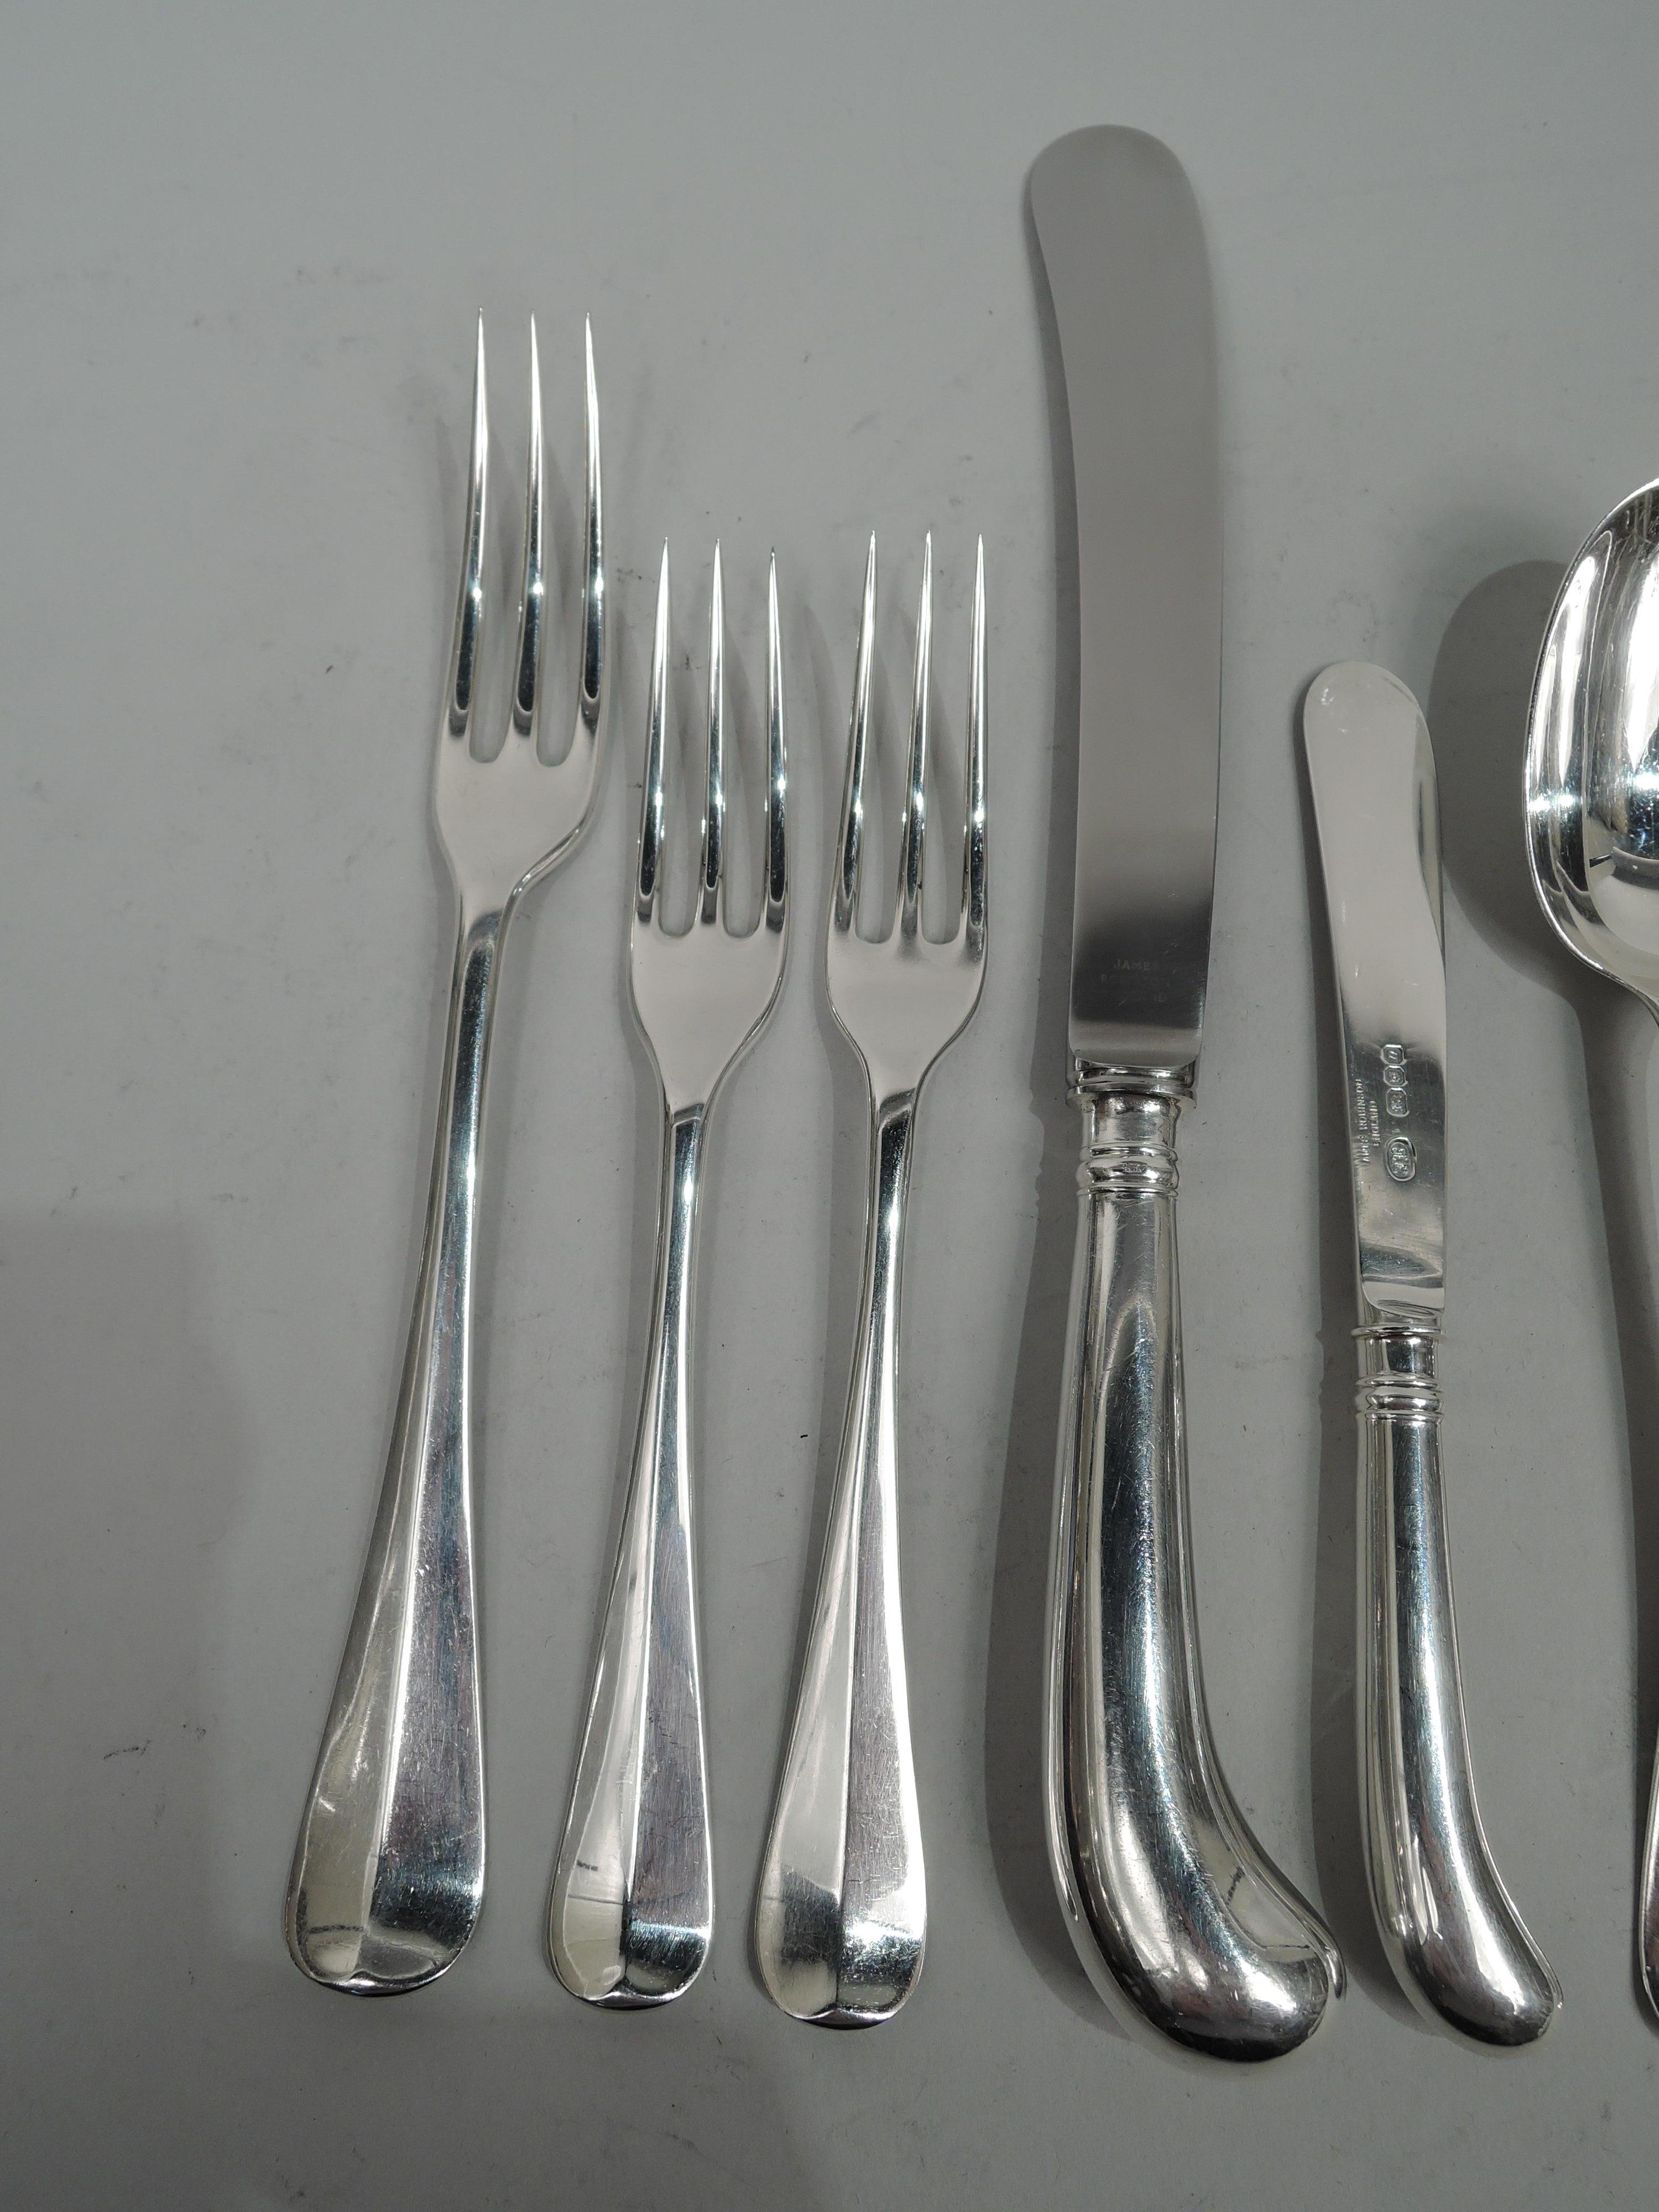 Queen Anne sterling silver dinner set for 12. Made by James Robinson in London. This set comprises 108 pieces:

Forks: 12 dinner forks (7 5/8) and 24 salad/dessert forks (6 1/2);

Knives: 12 dinner knives and 12 butter knives;

Spoons: 12